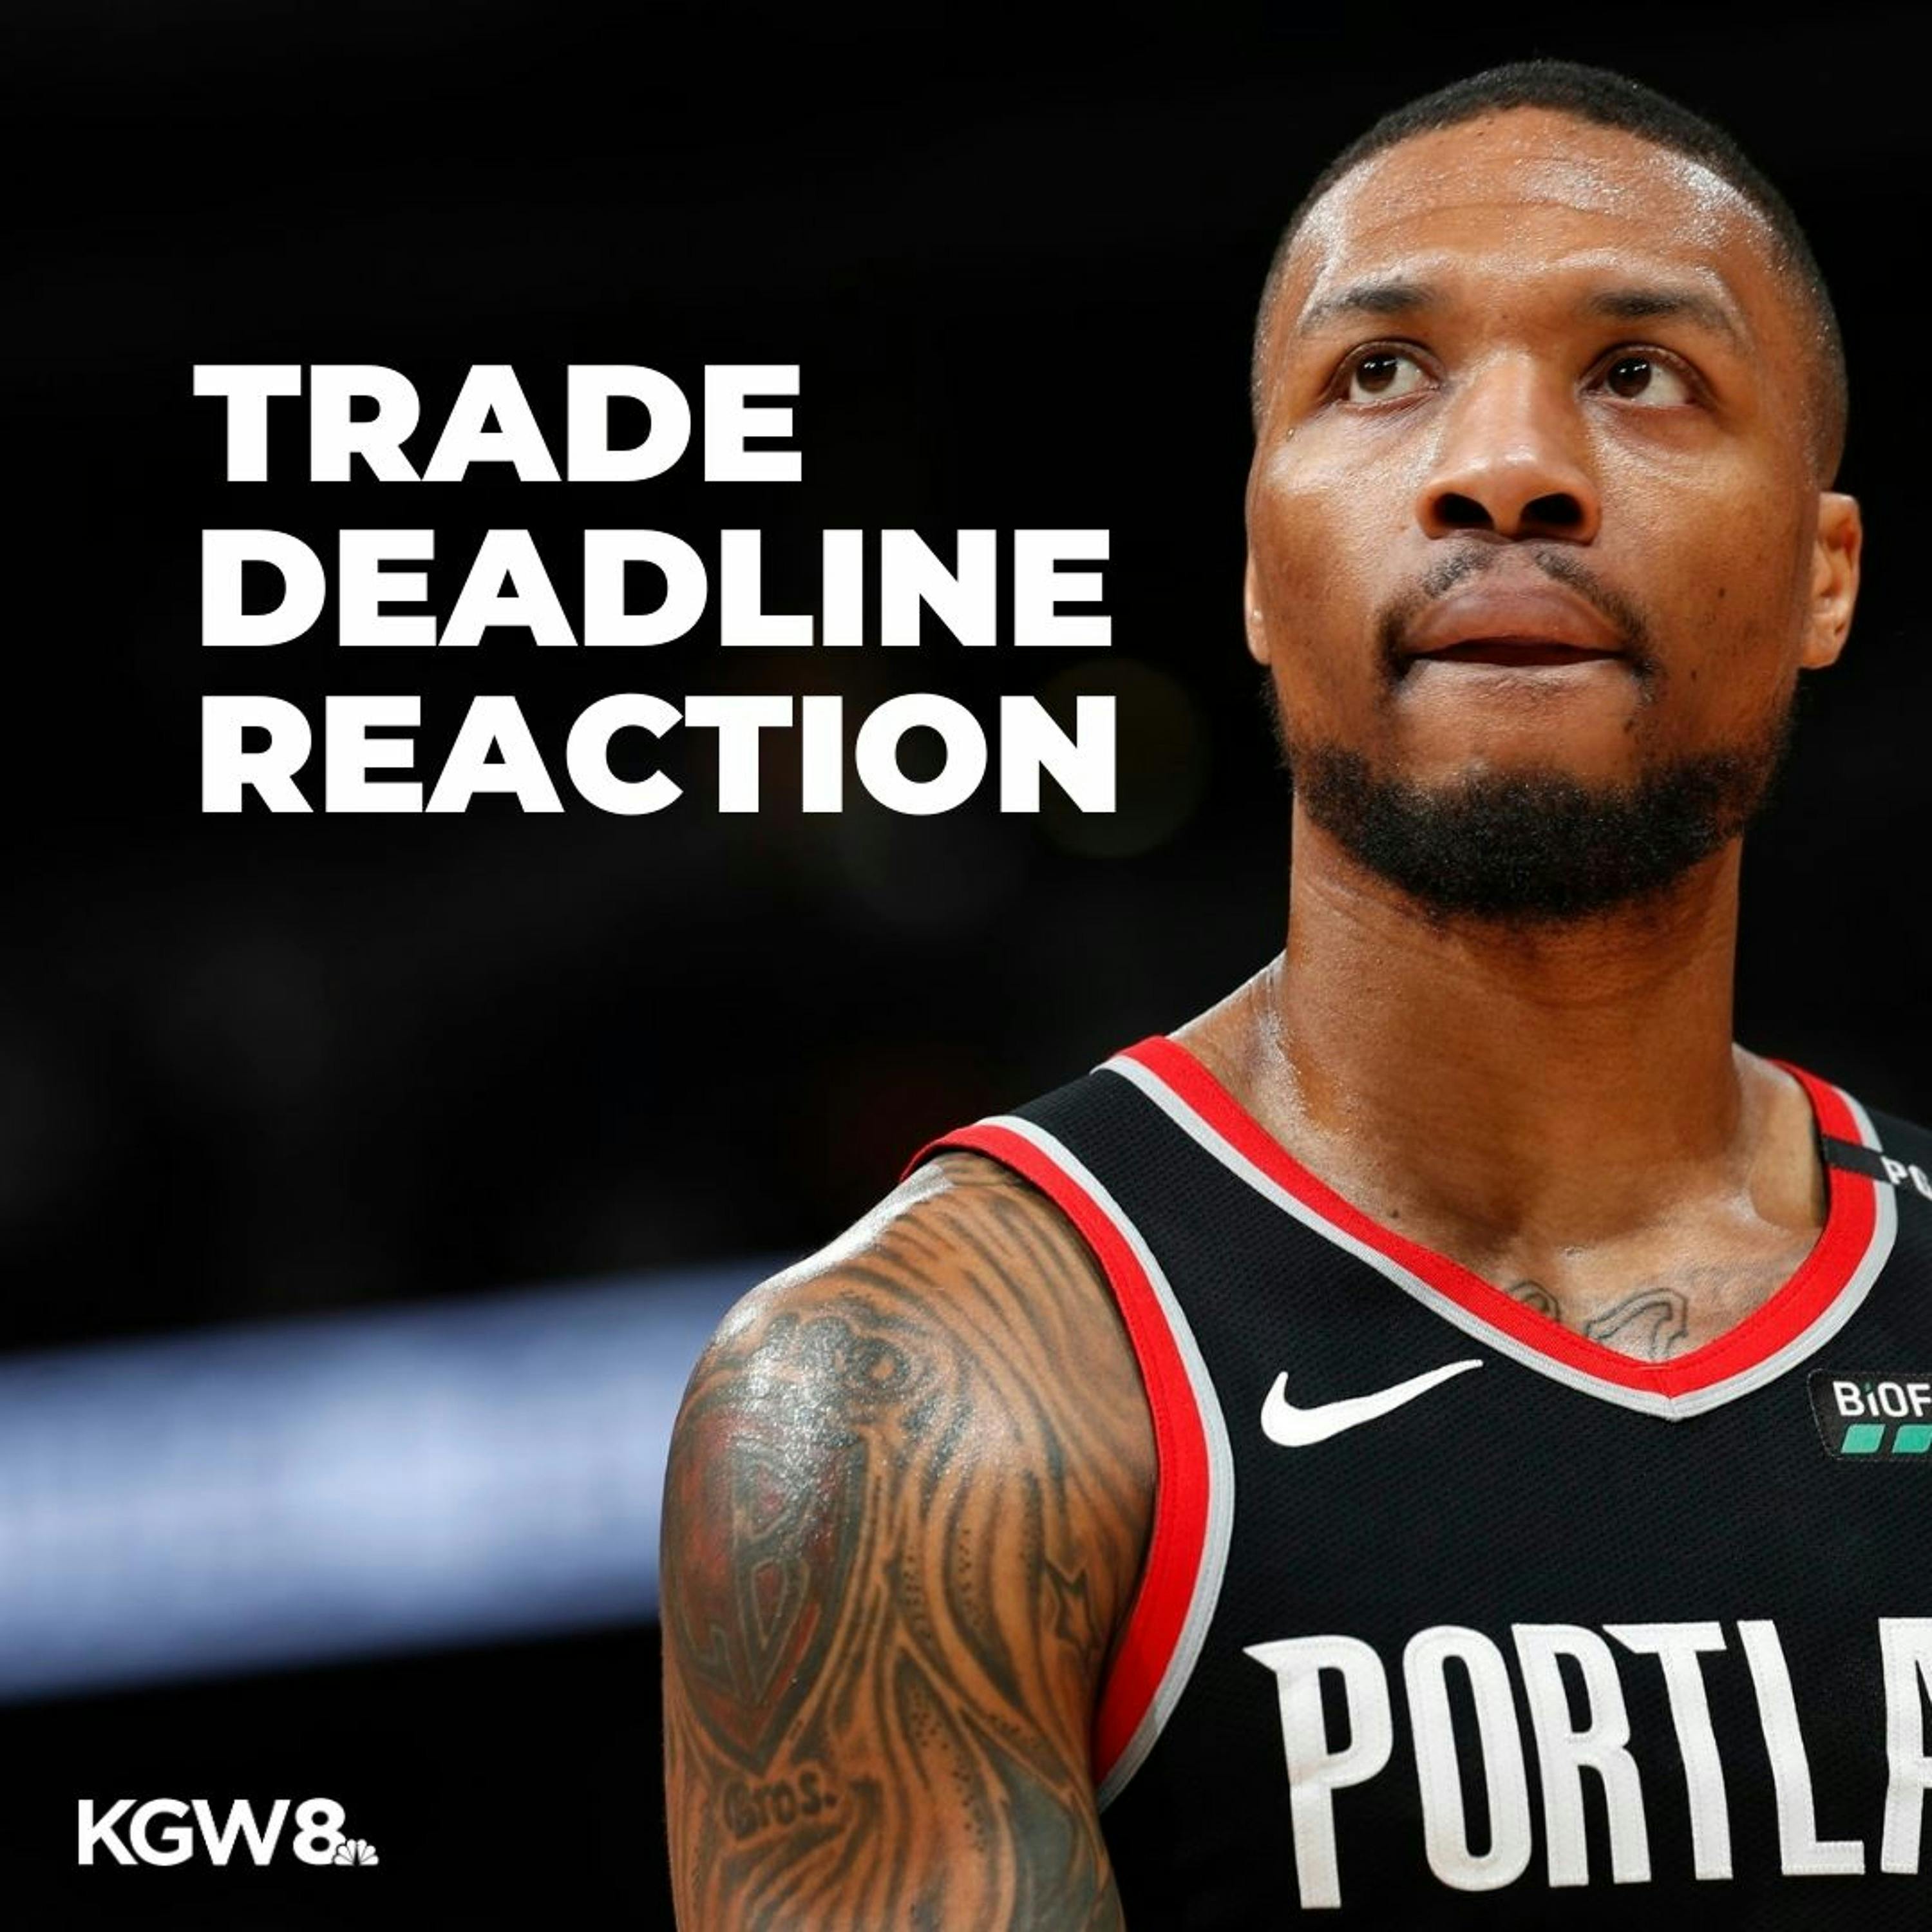 Reacting to the trade deadline